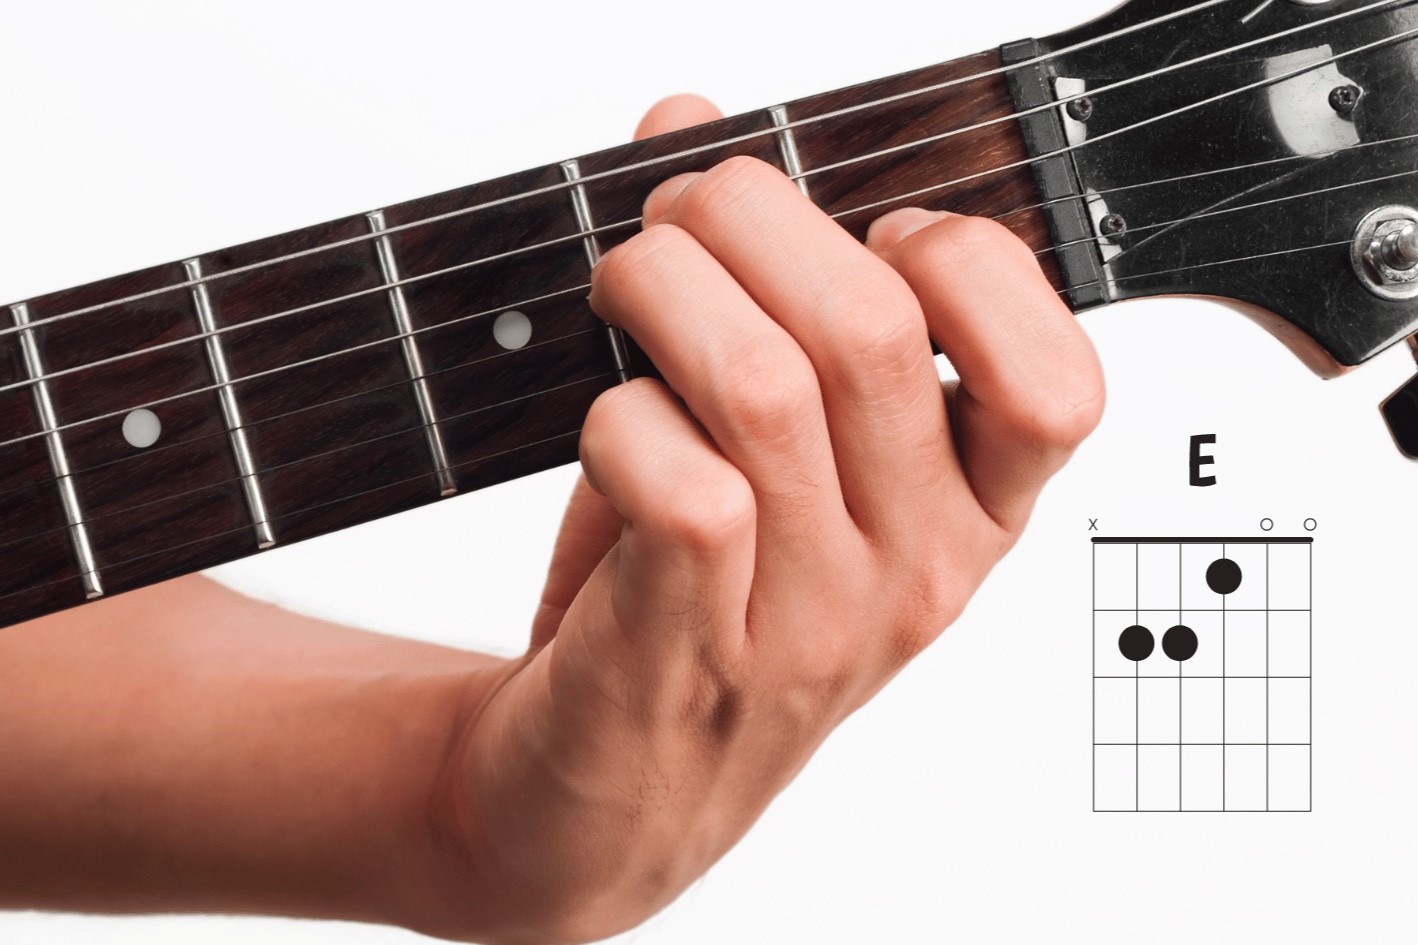 Master The EM7 Guitar Chord With These Pro Tips!